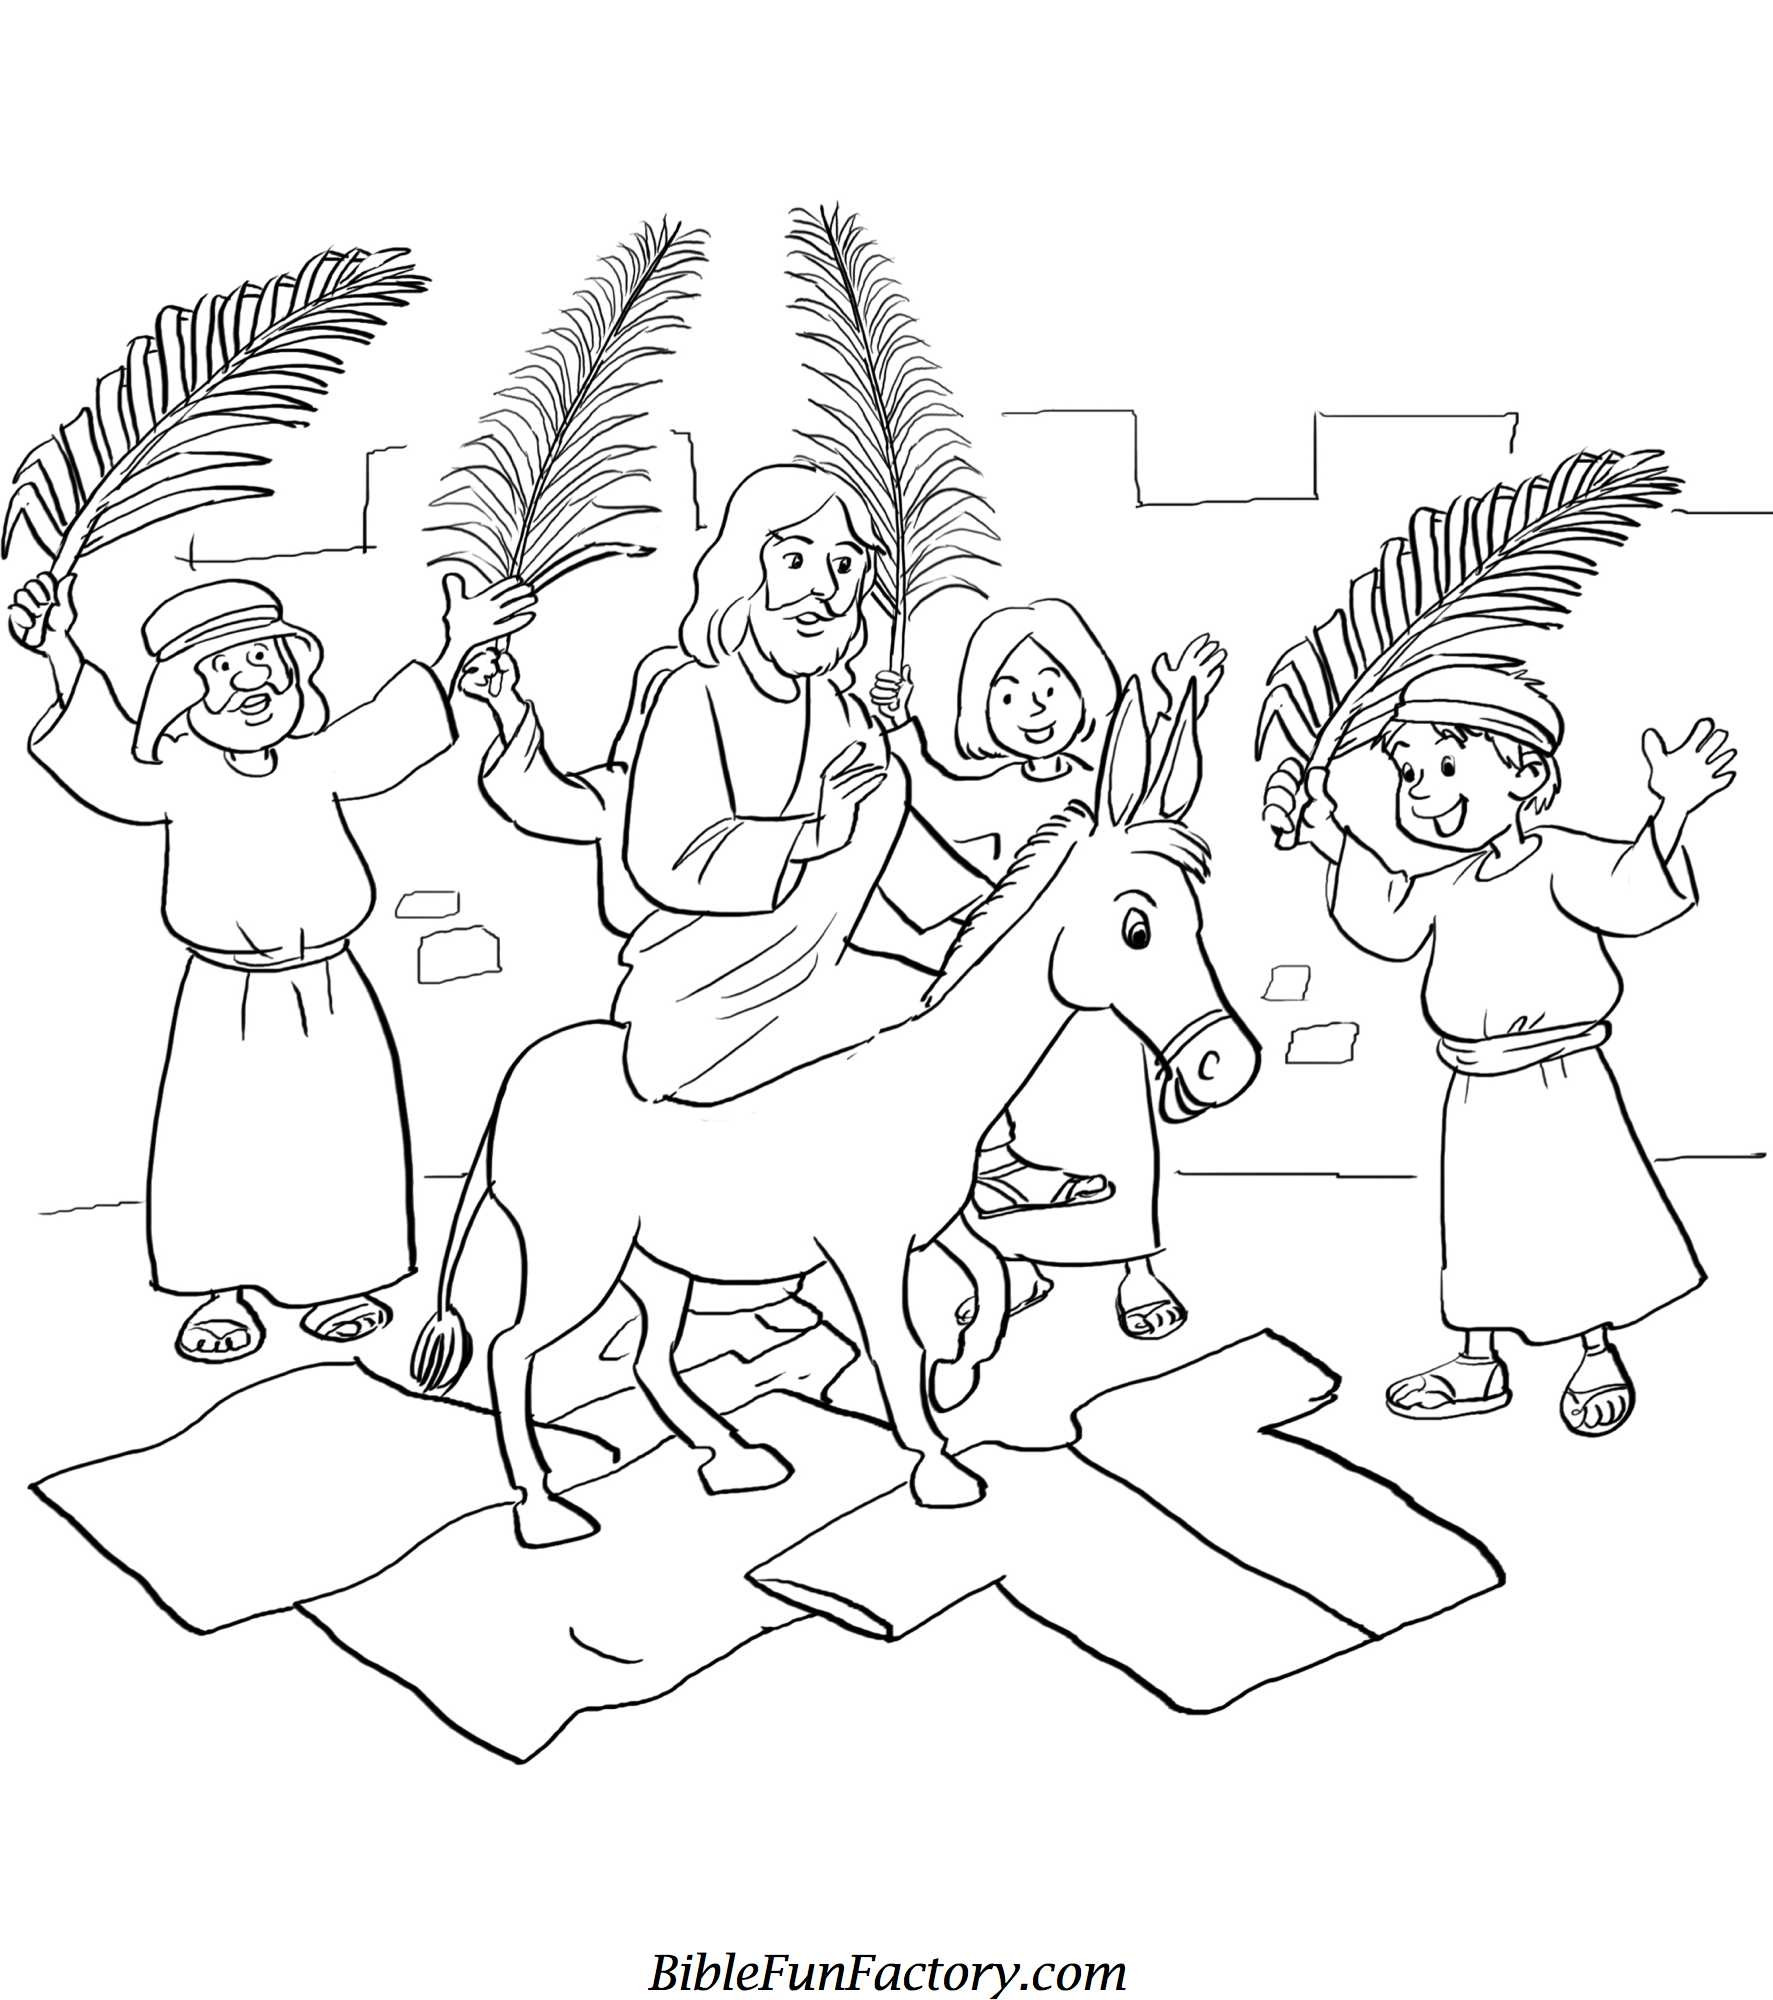 Palm Sunday Coloring Pages
 Free Palm Sunday Coloring Pages Bible Lessons Games and